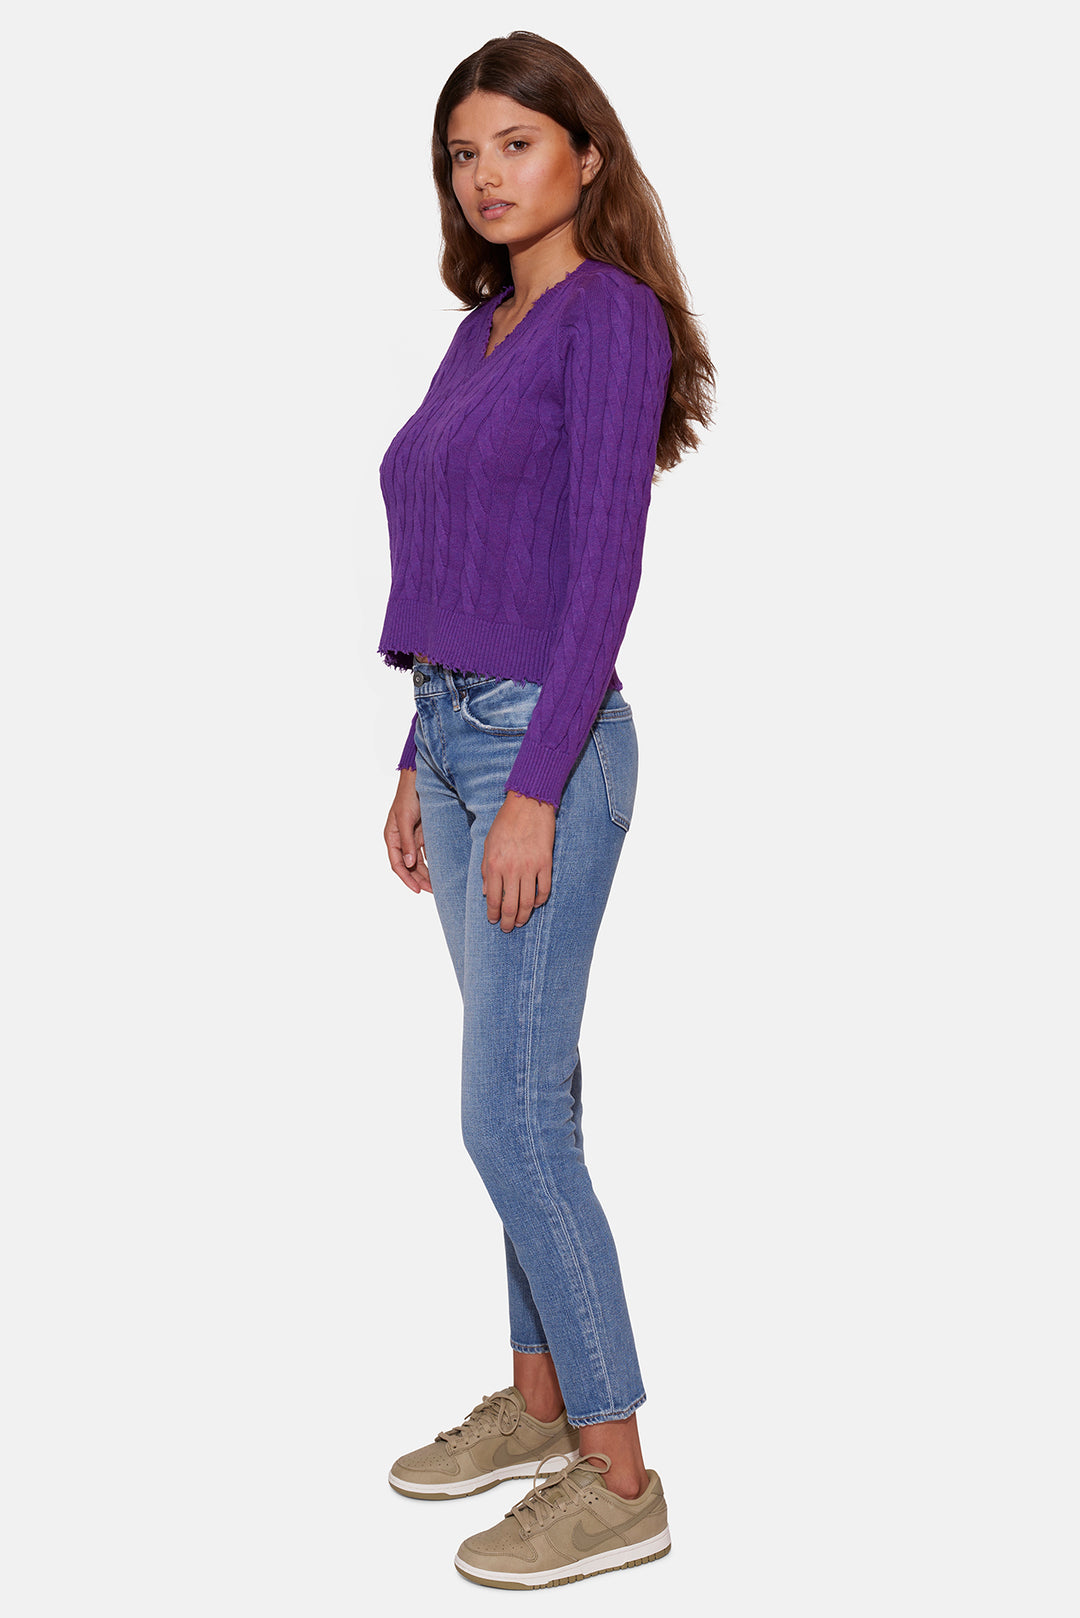 Amber Cable V Neck Sweater Purple